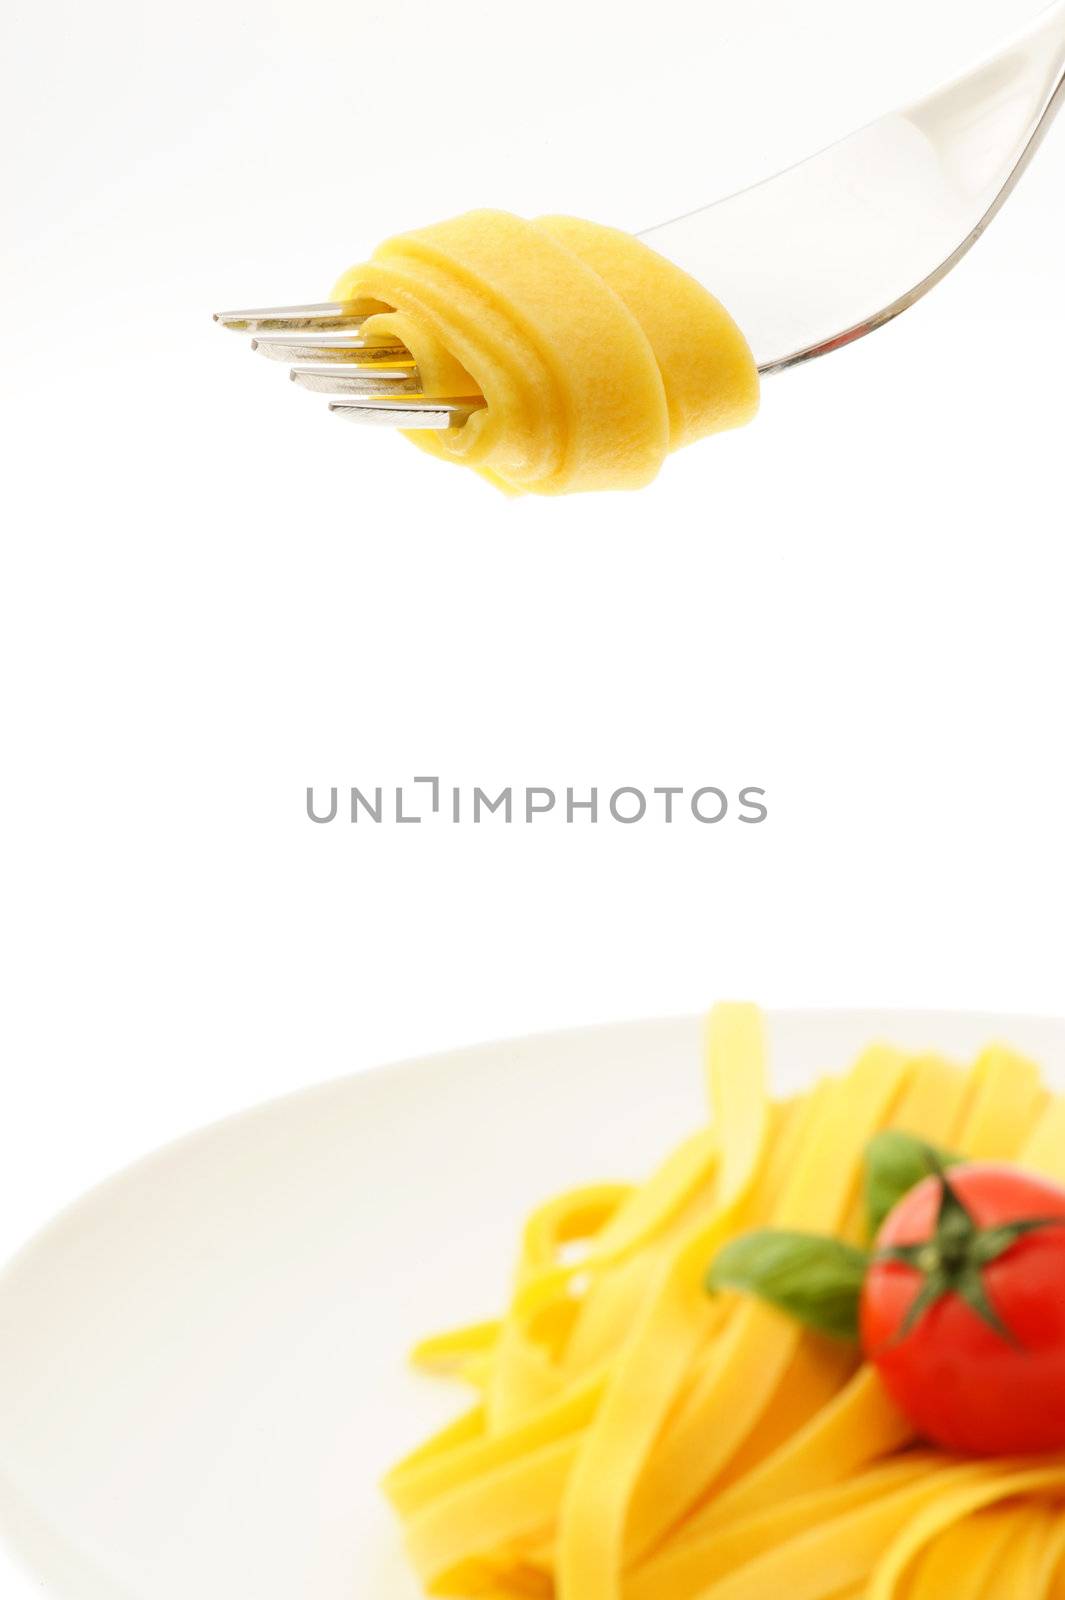 Rolled spaghetti on a fork